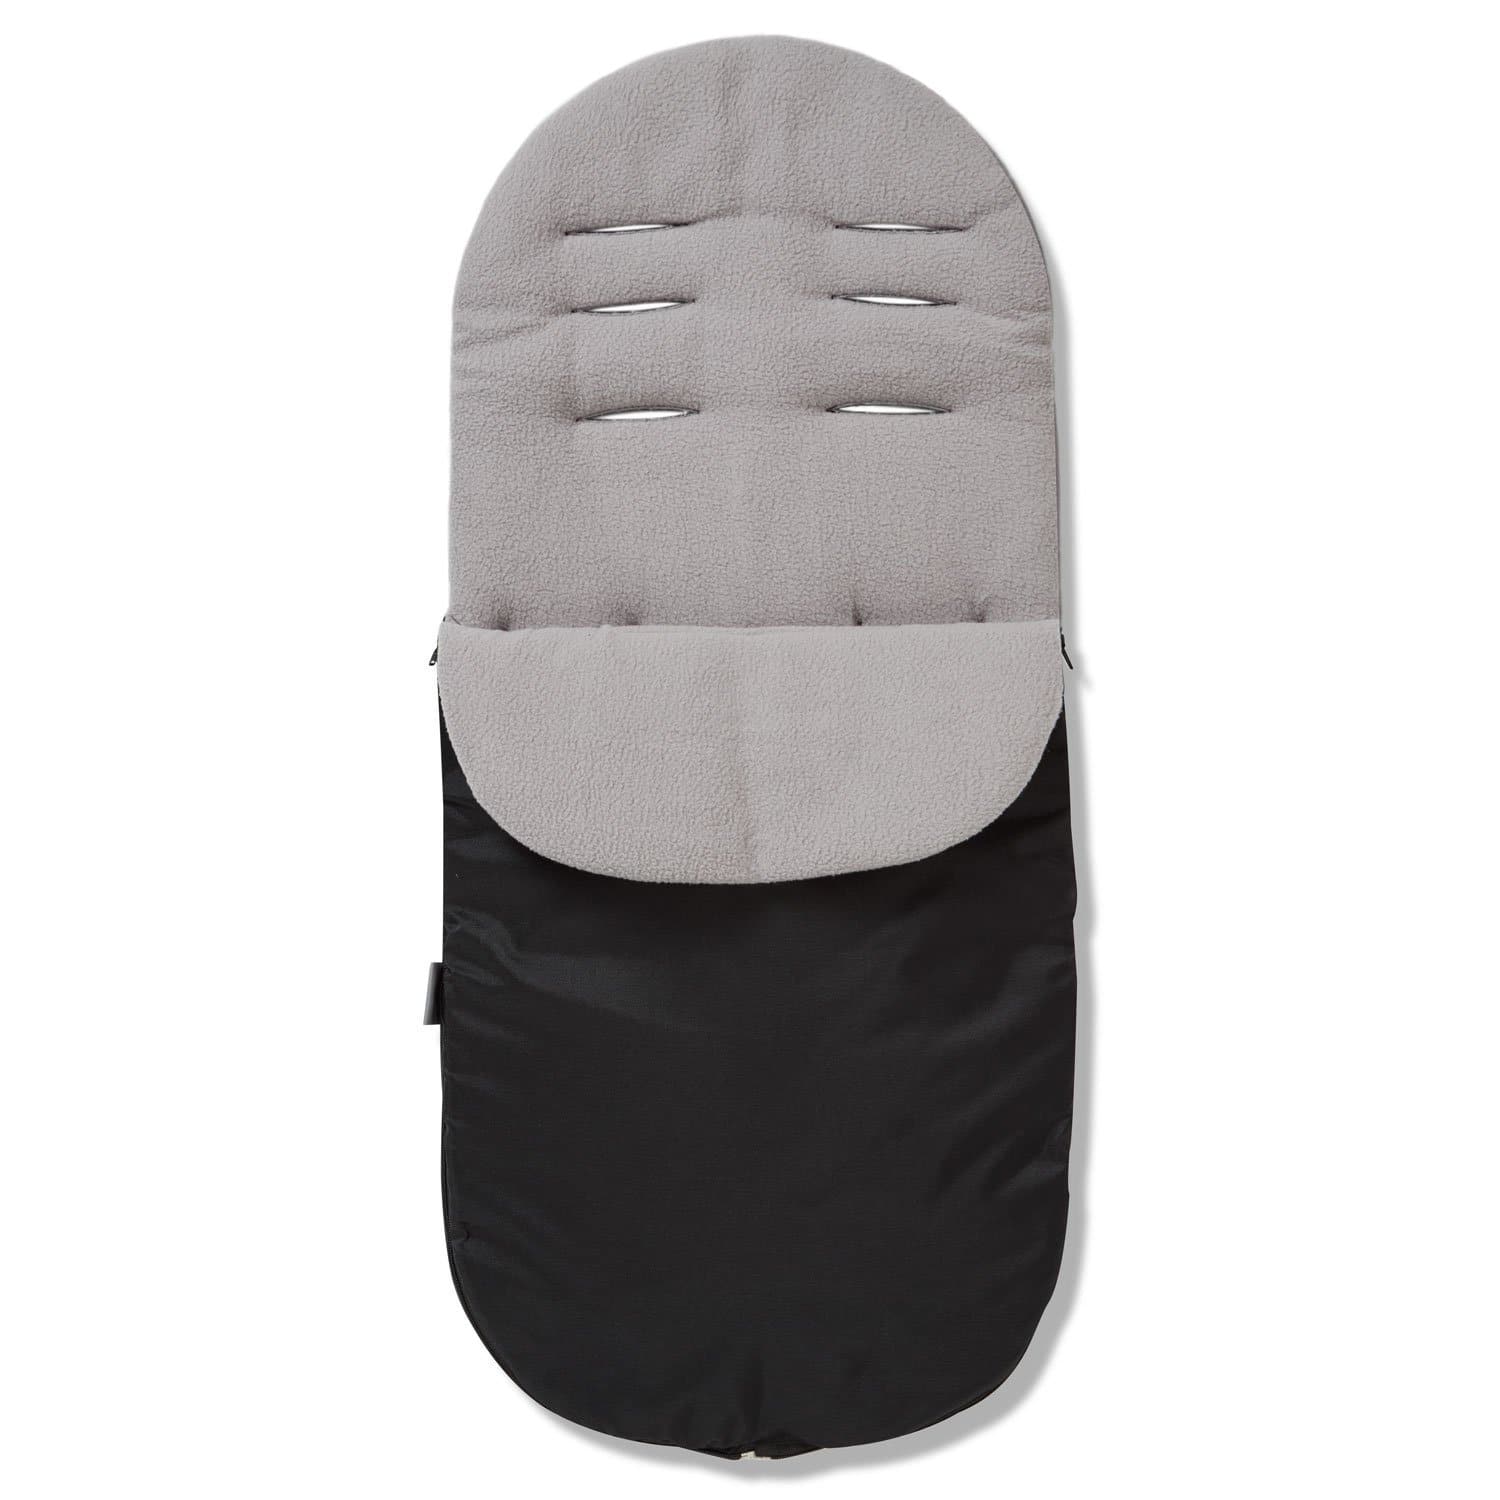 Footmuff / Cosy Toes Compatible with Mountain Buggy - For Your Little One